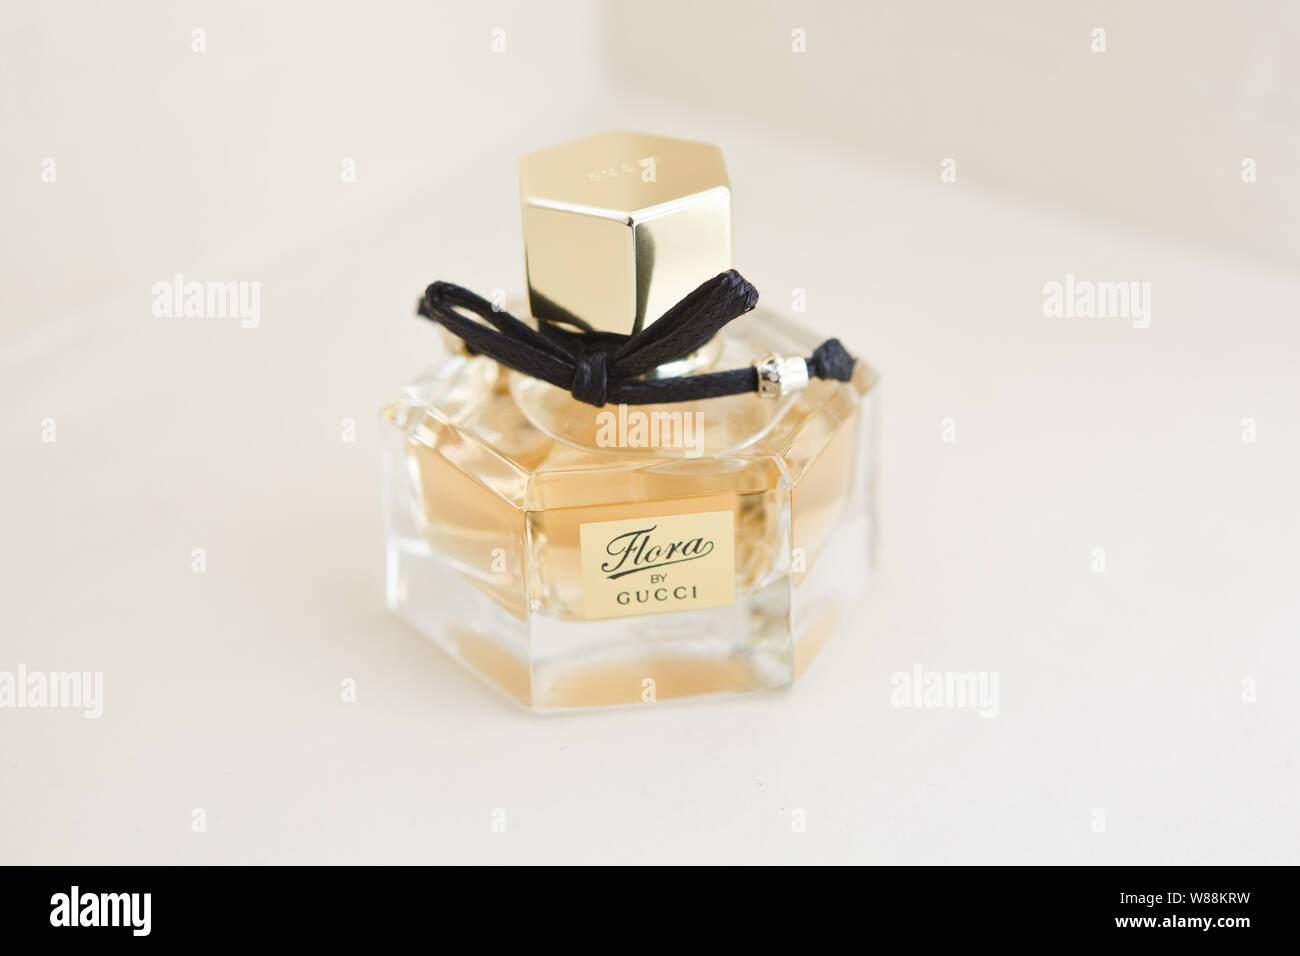 Flora by Gucci Perfume Bottle Stock Photo